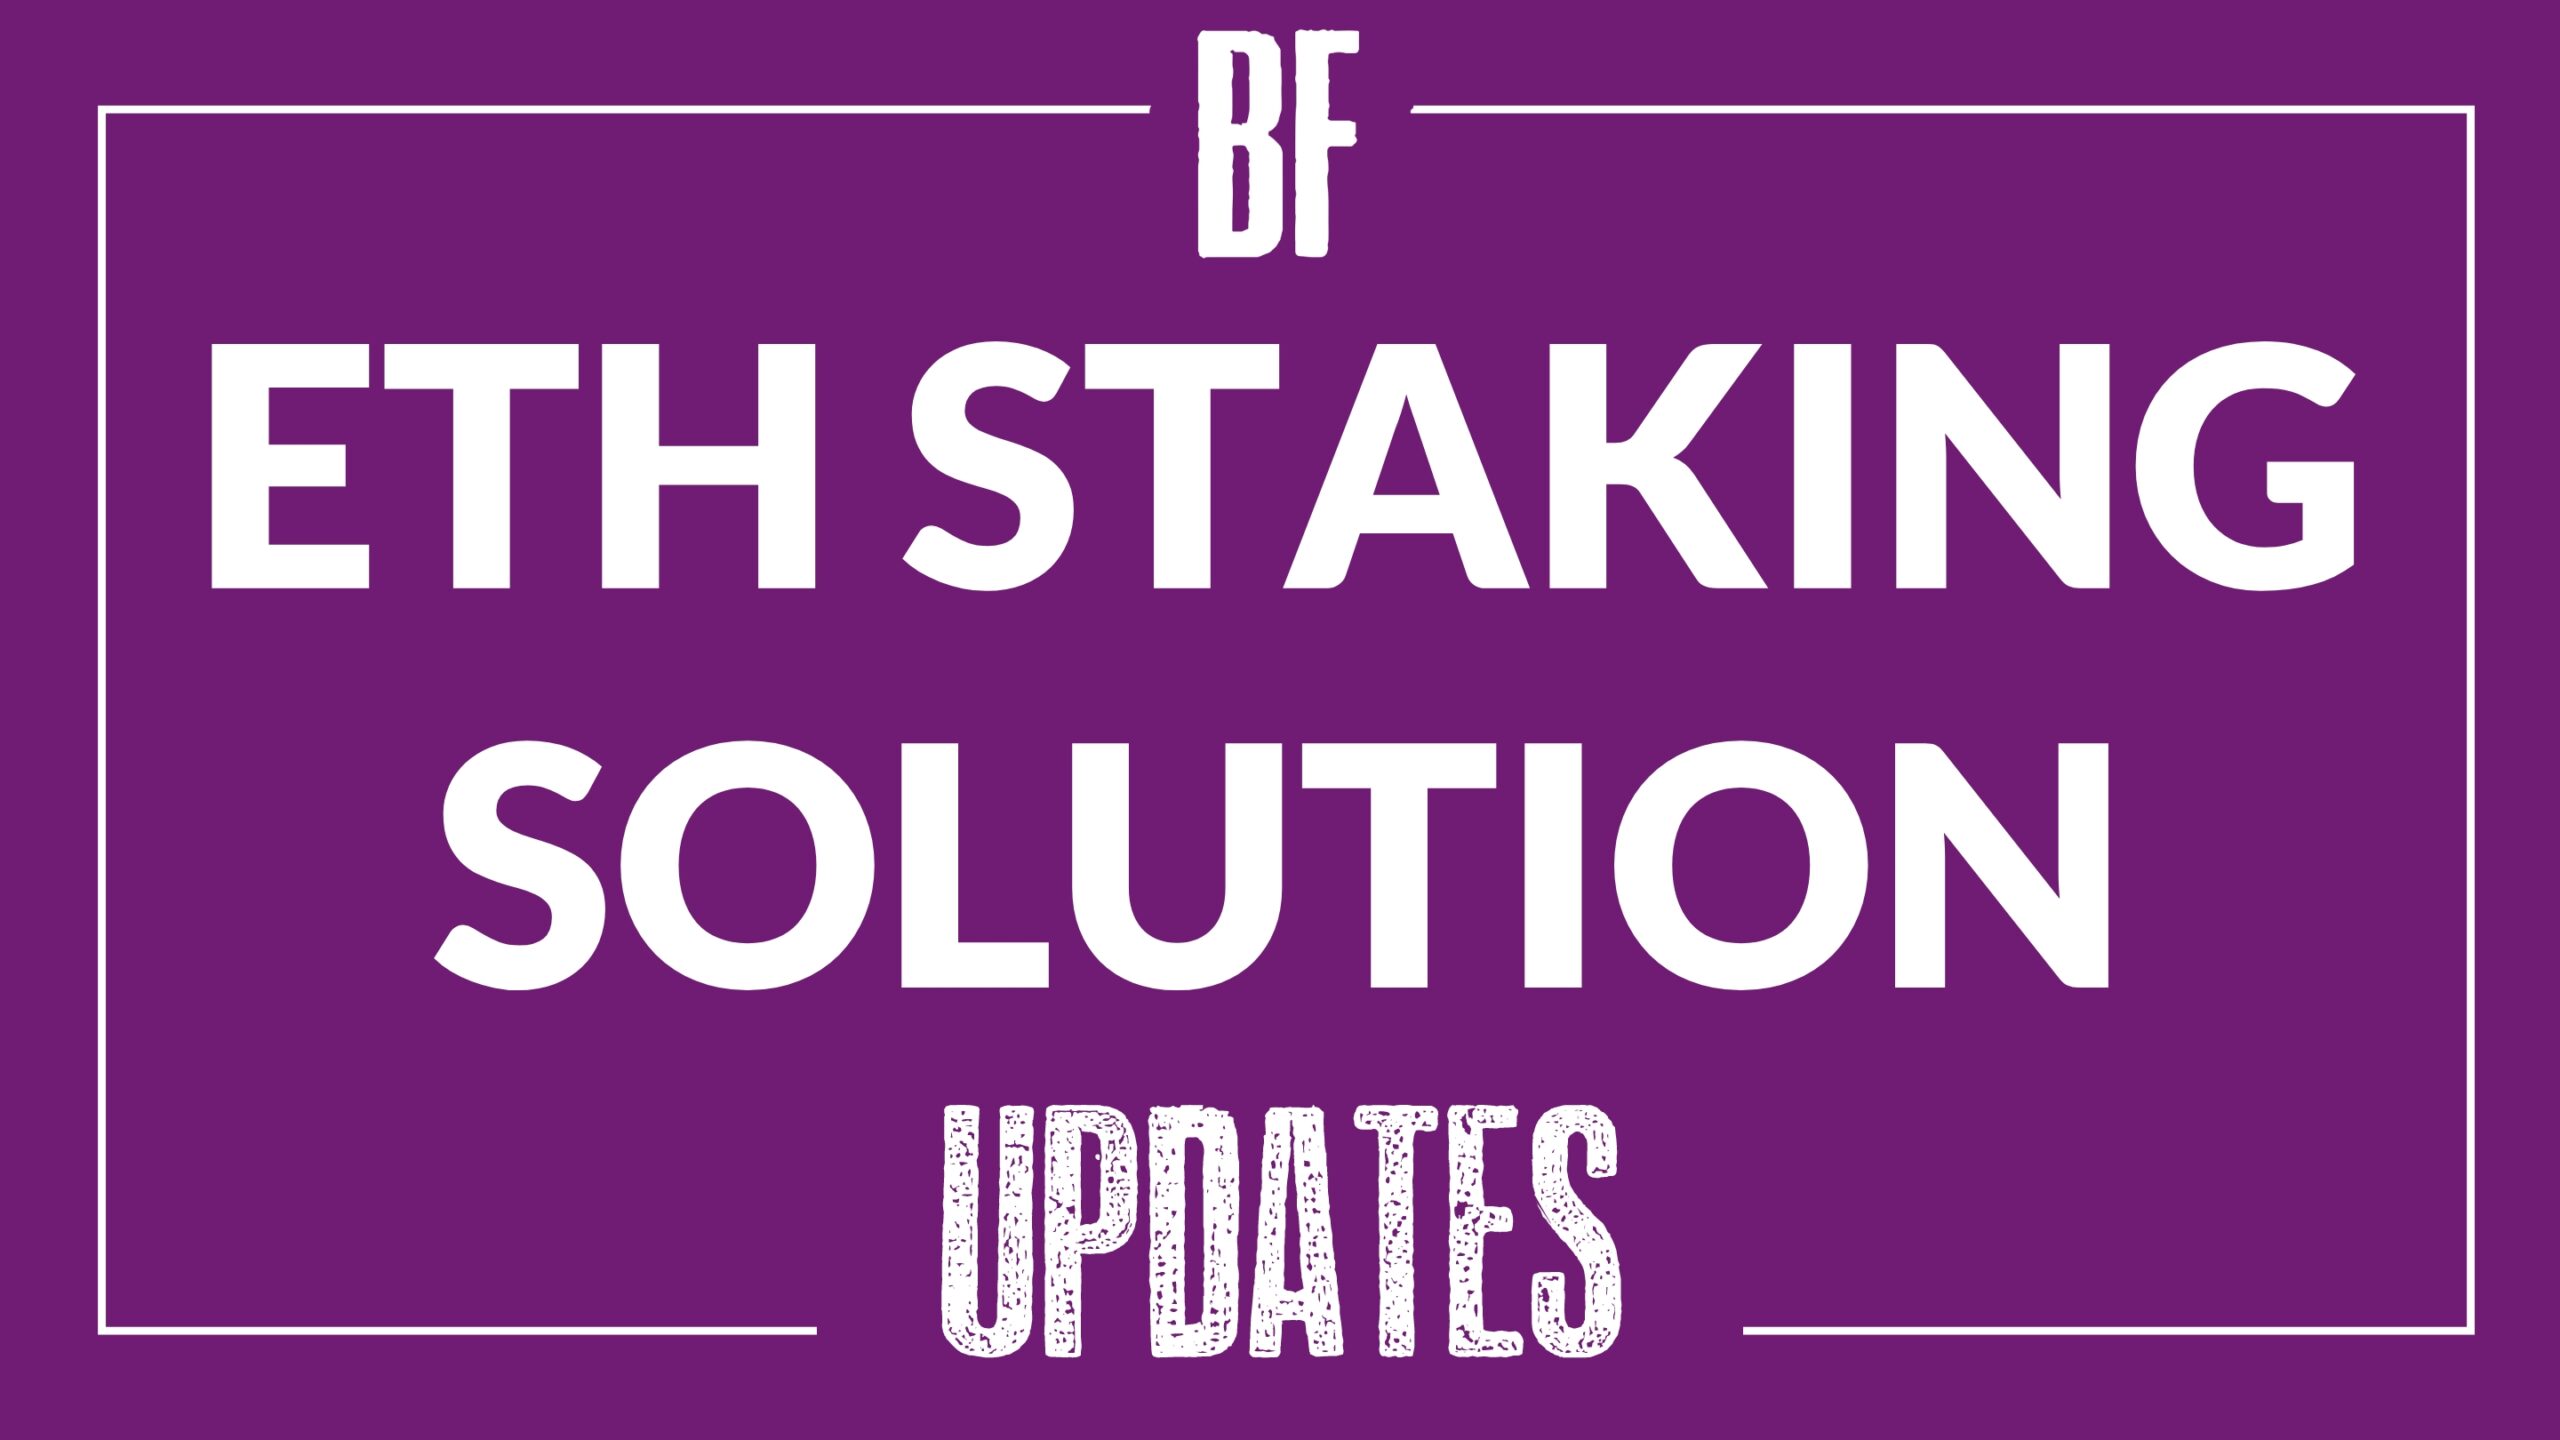 Bnk To The Future (BF) ETH Staking Solution Updates